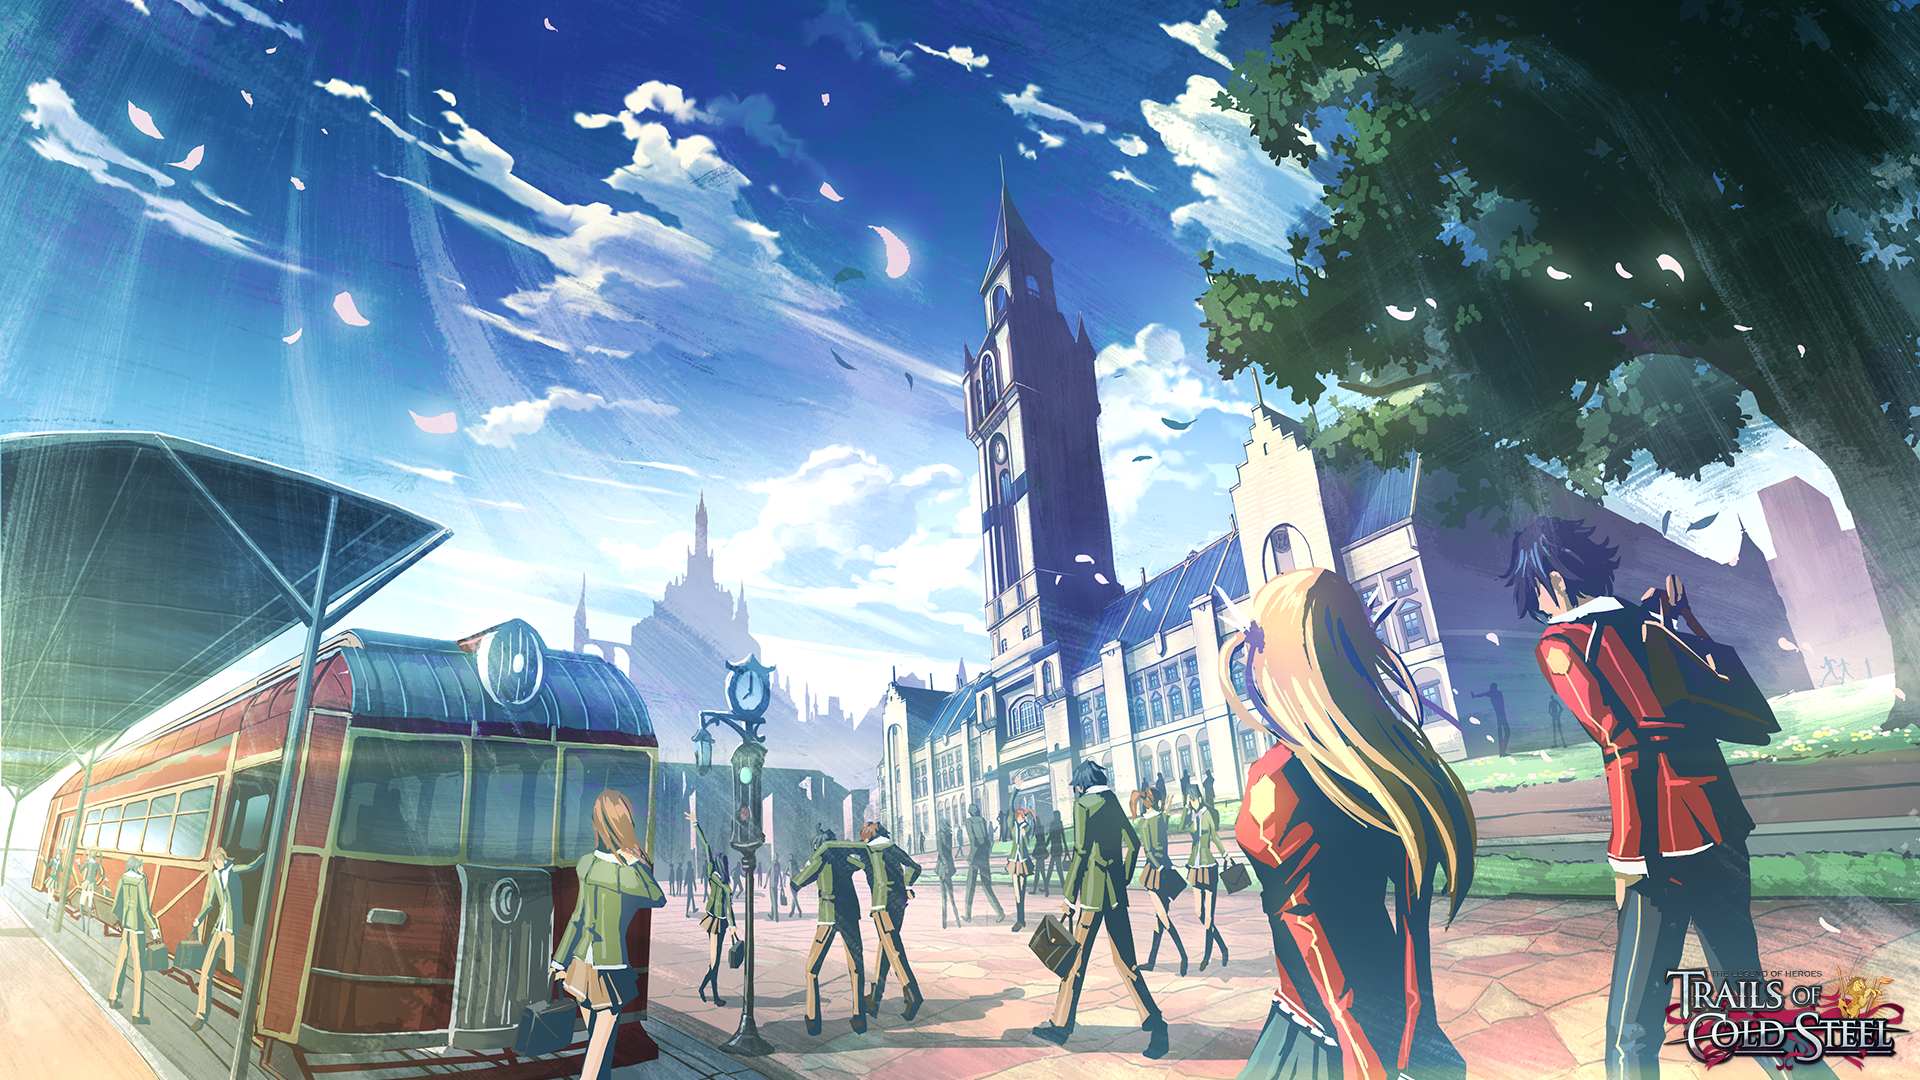 the legend of heroes: trails of cold steel, video game